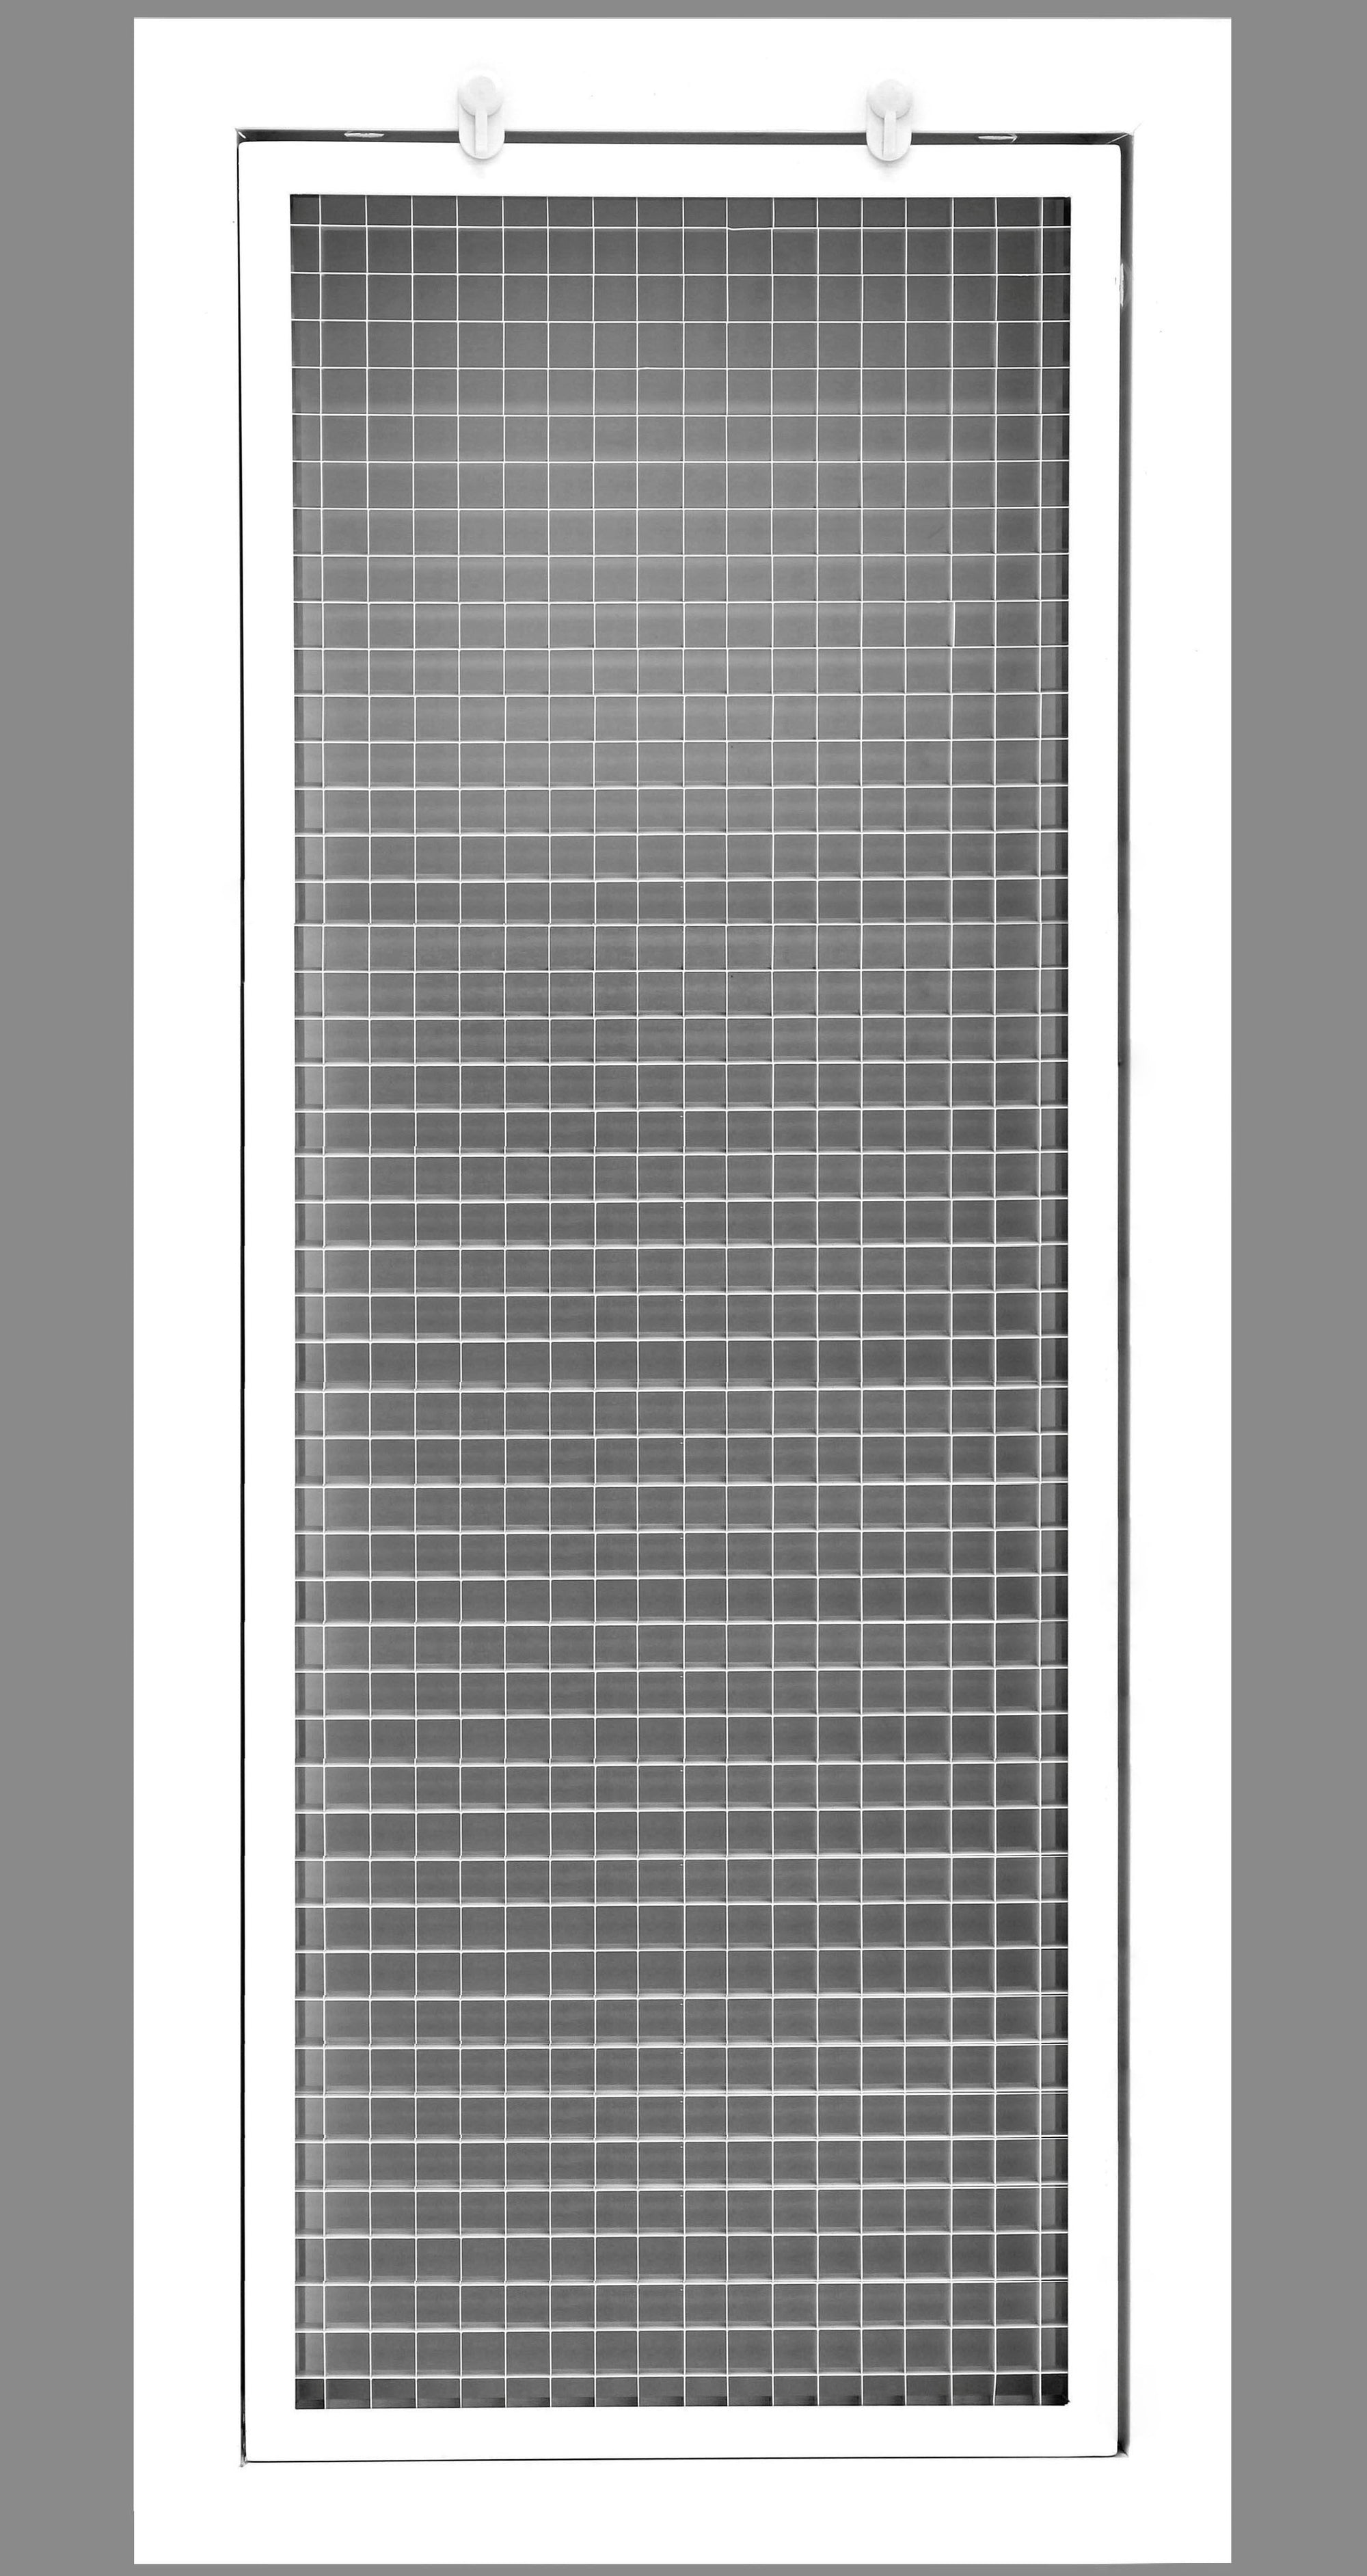 8" x 34" Cube Core Eggcrate Return Air Filter Grille for 1" Filter